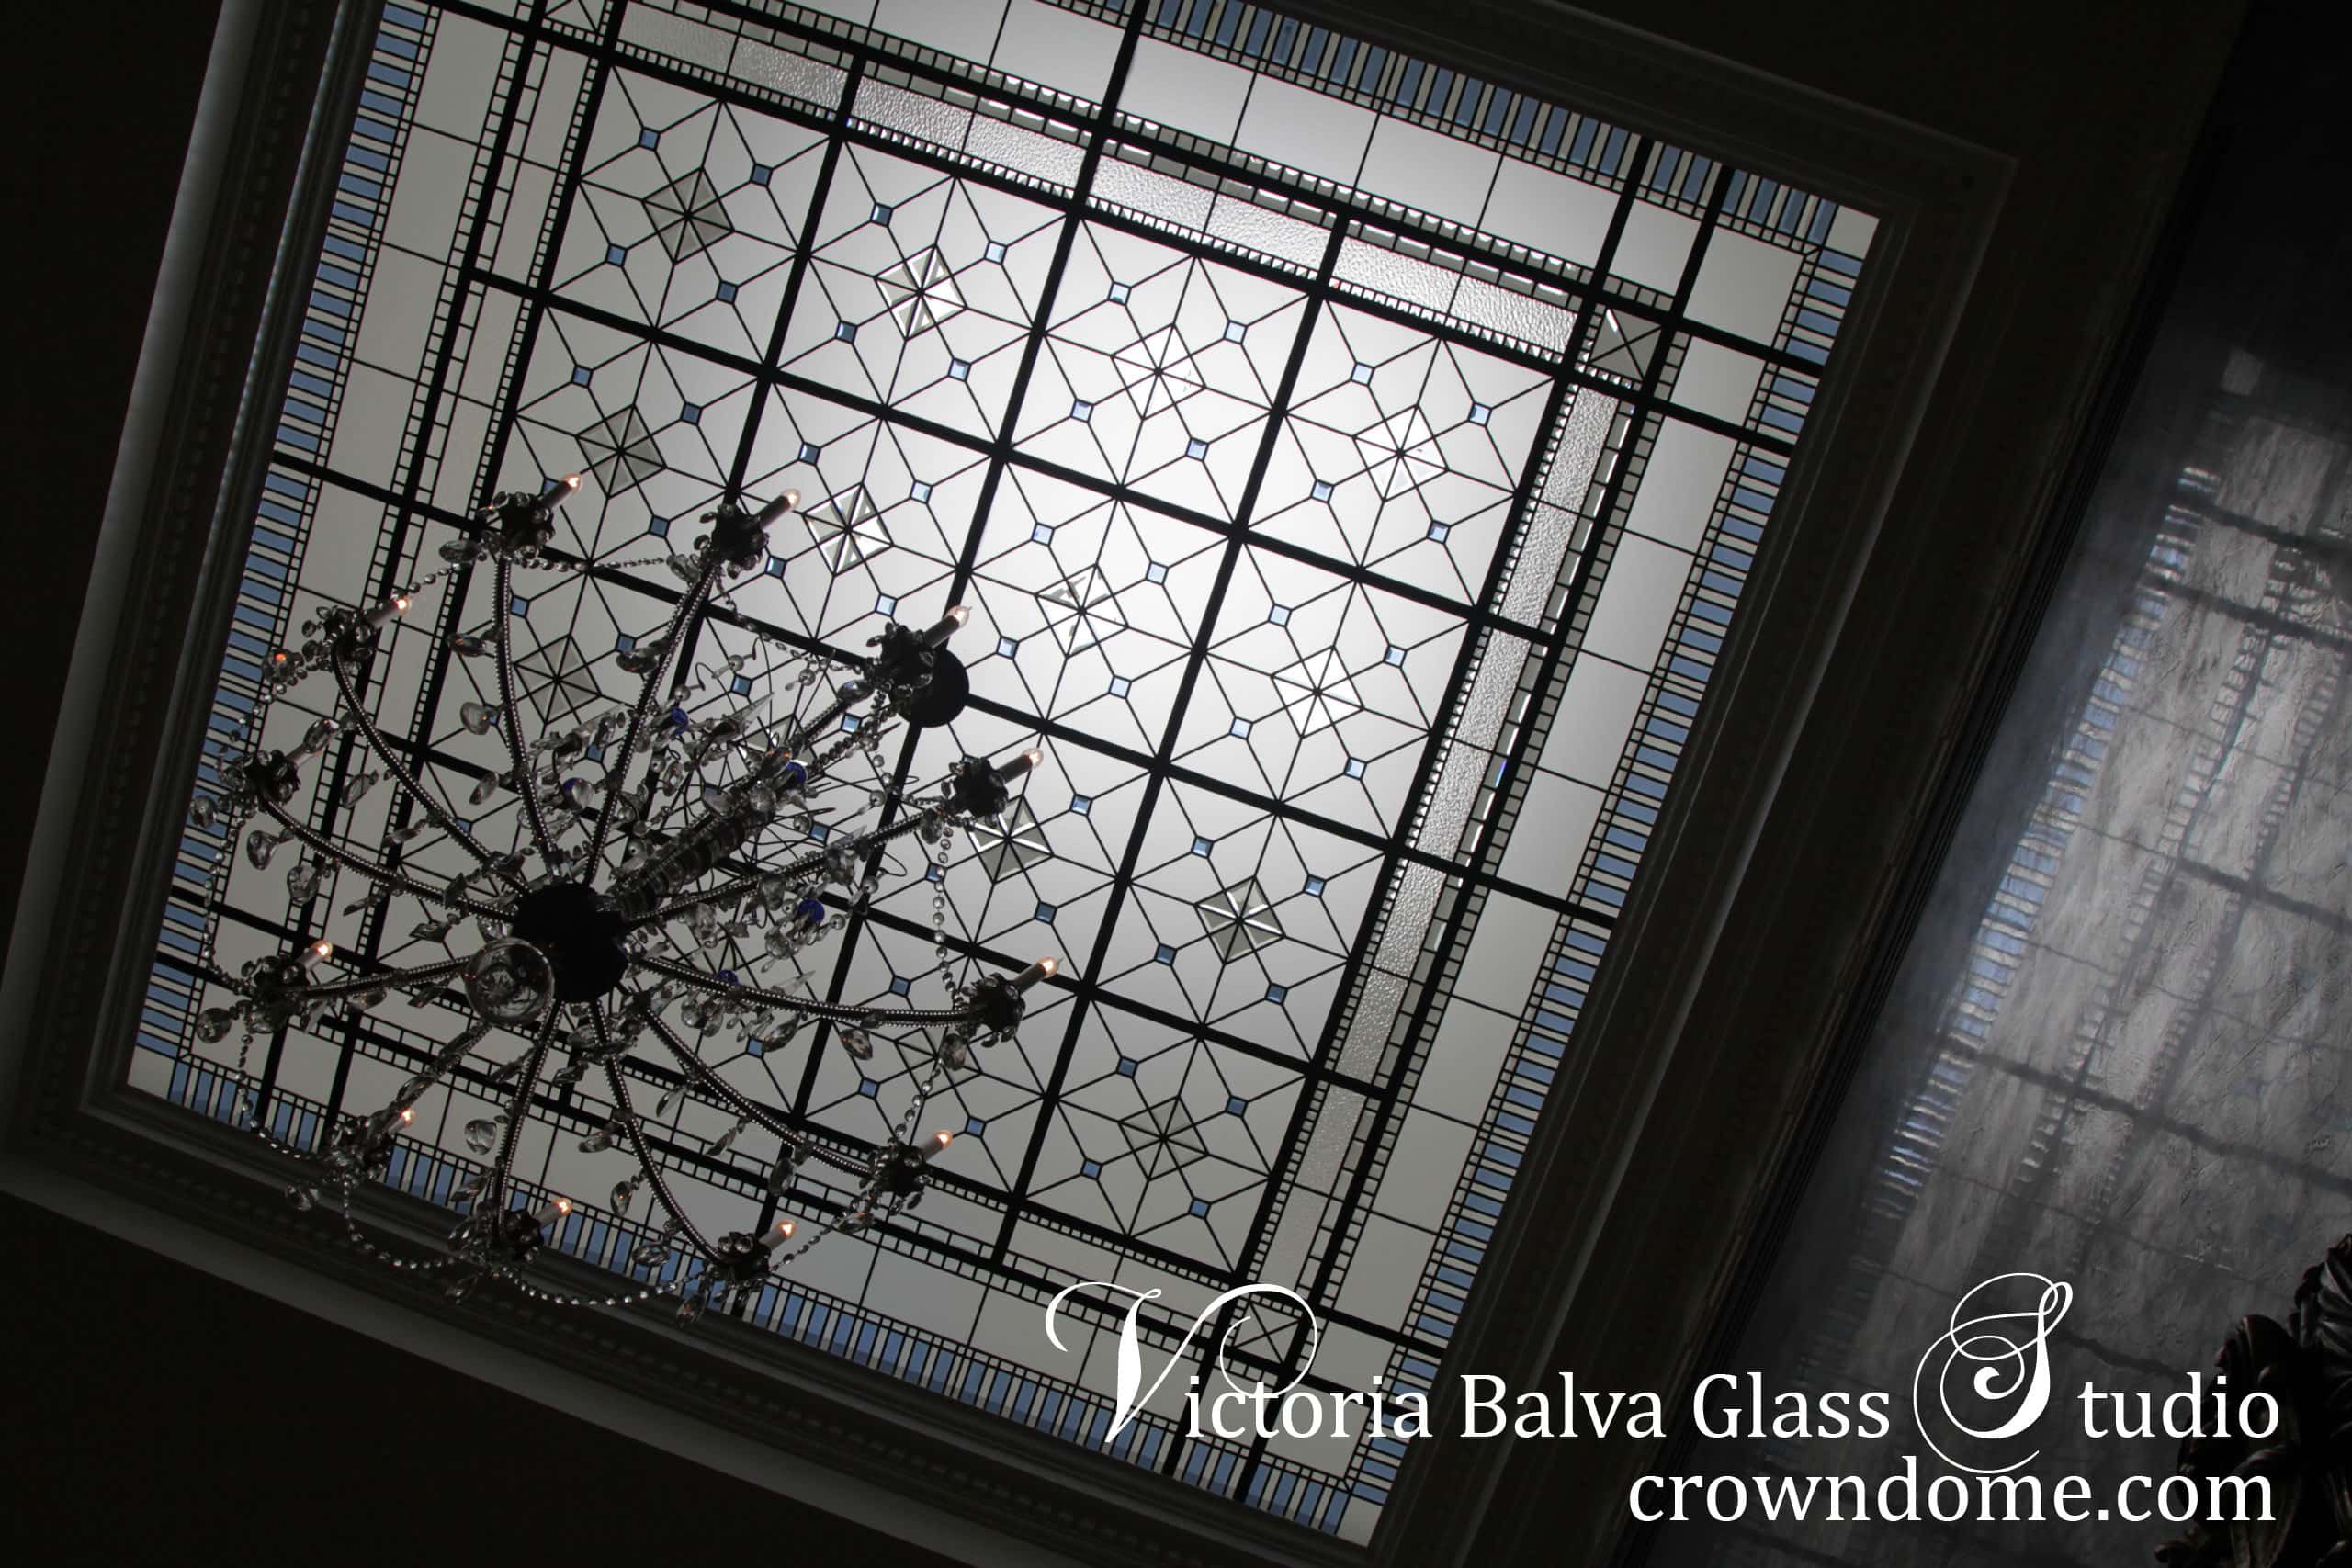 Large leaded glass skylight for a double height grand entrance foyer of a custom built residence inspired by historical Greight Britain estates. Large crystal chandelier with blue accents suspended from a center of the decorative glass ceiling